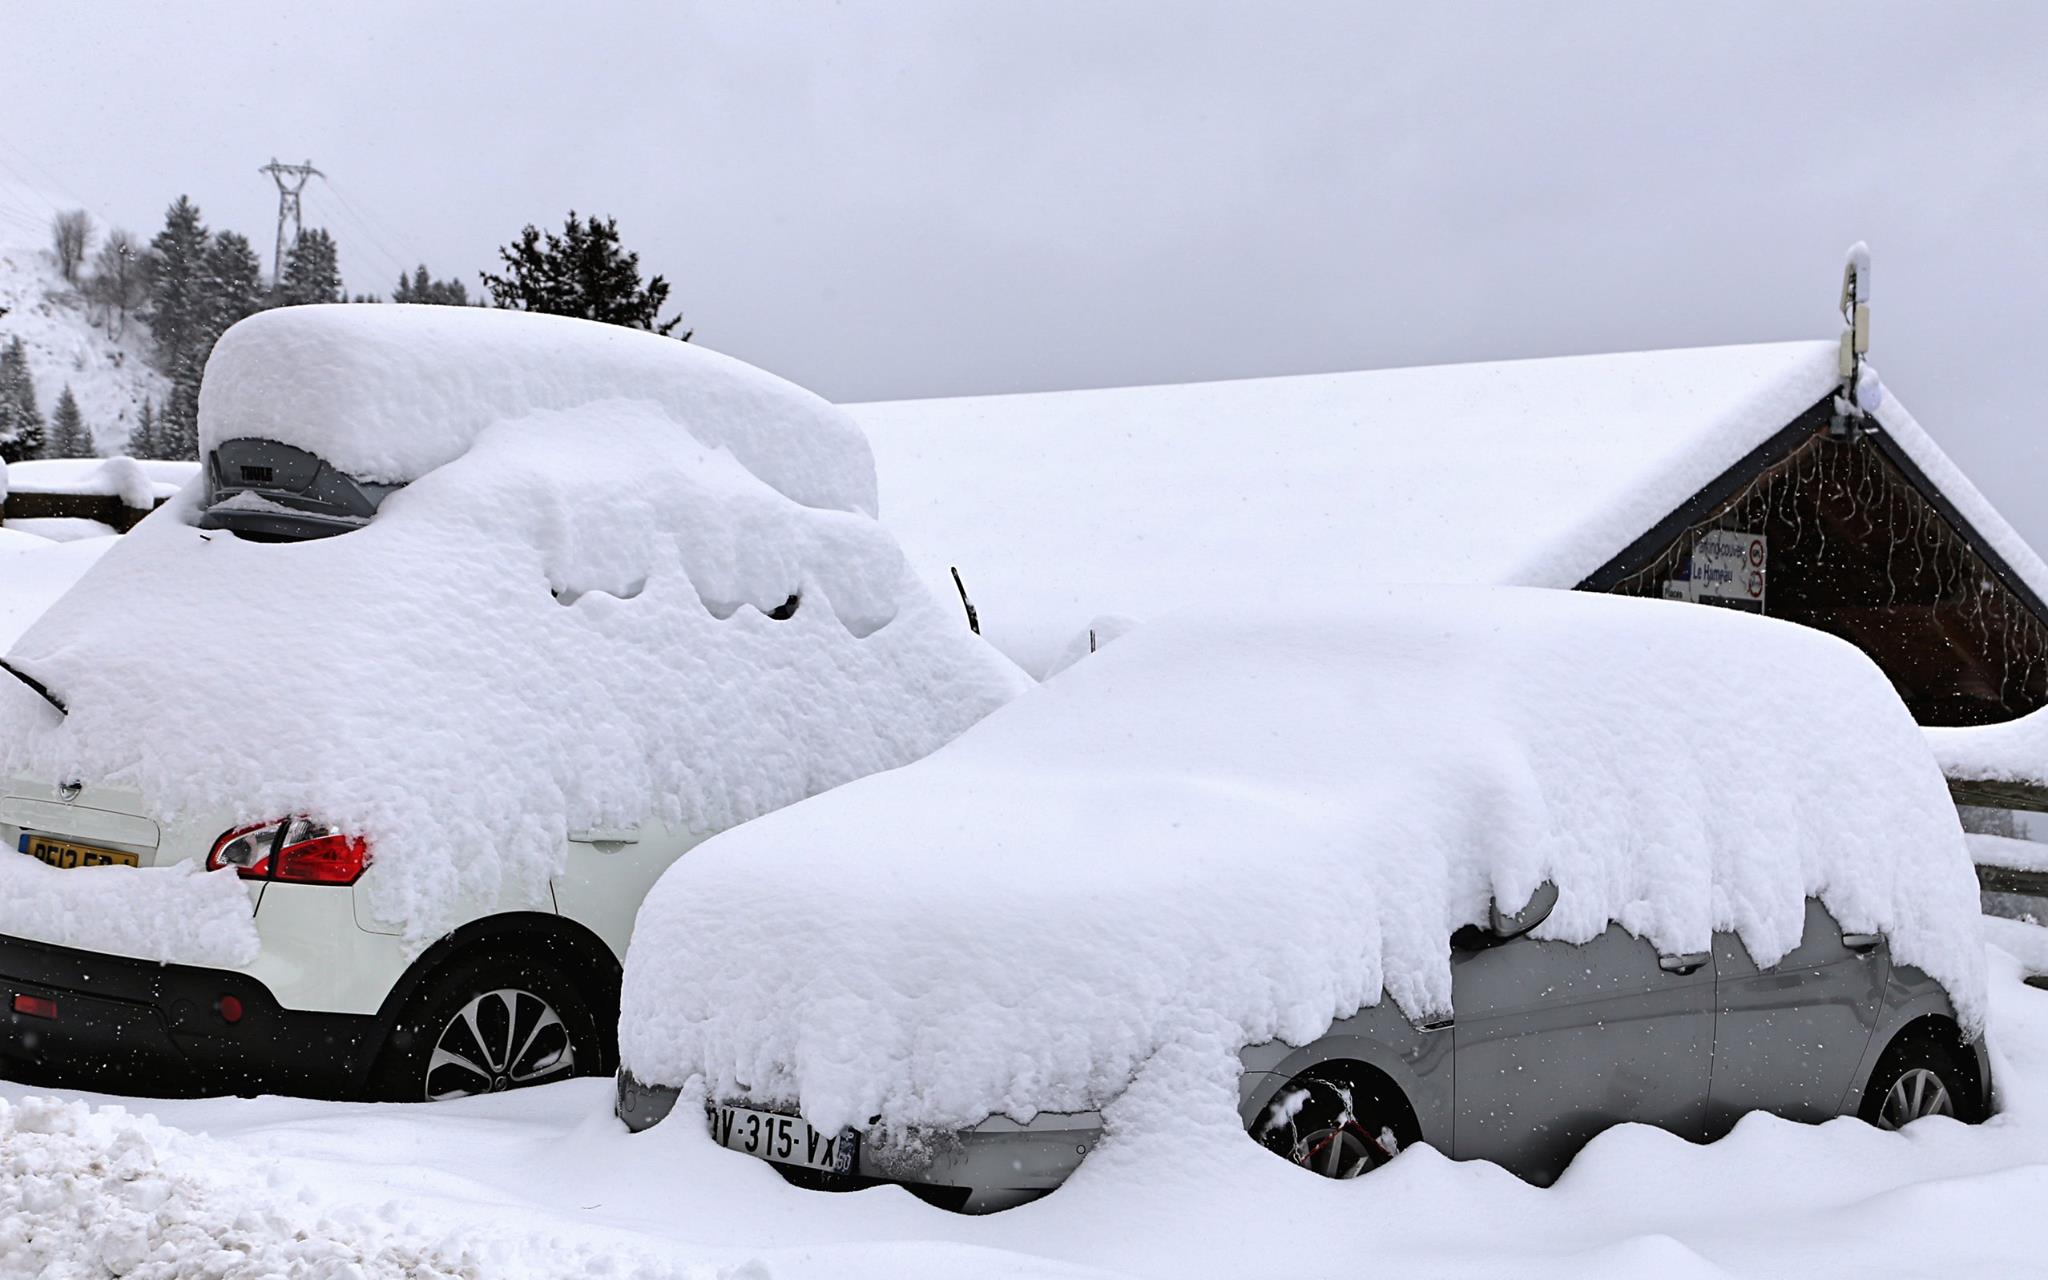 SNOW! 50cm So Far In The Alps, 80cm More Forecast In Next 72 Hours